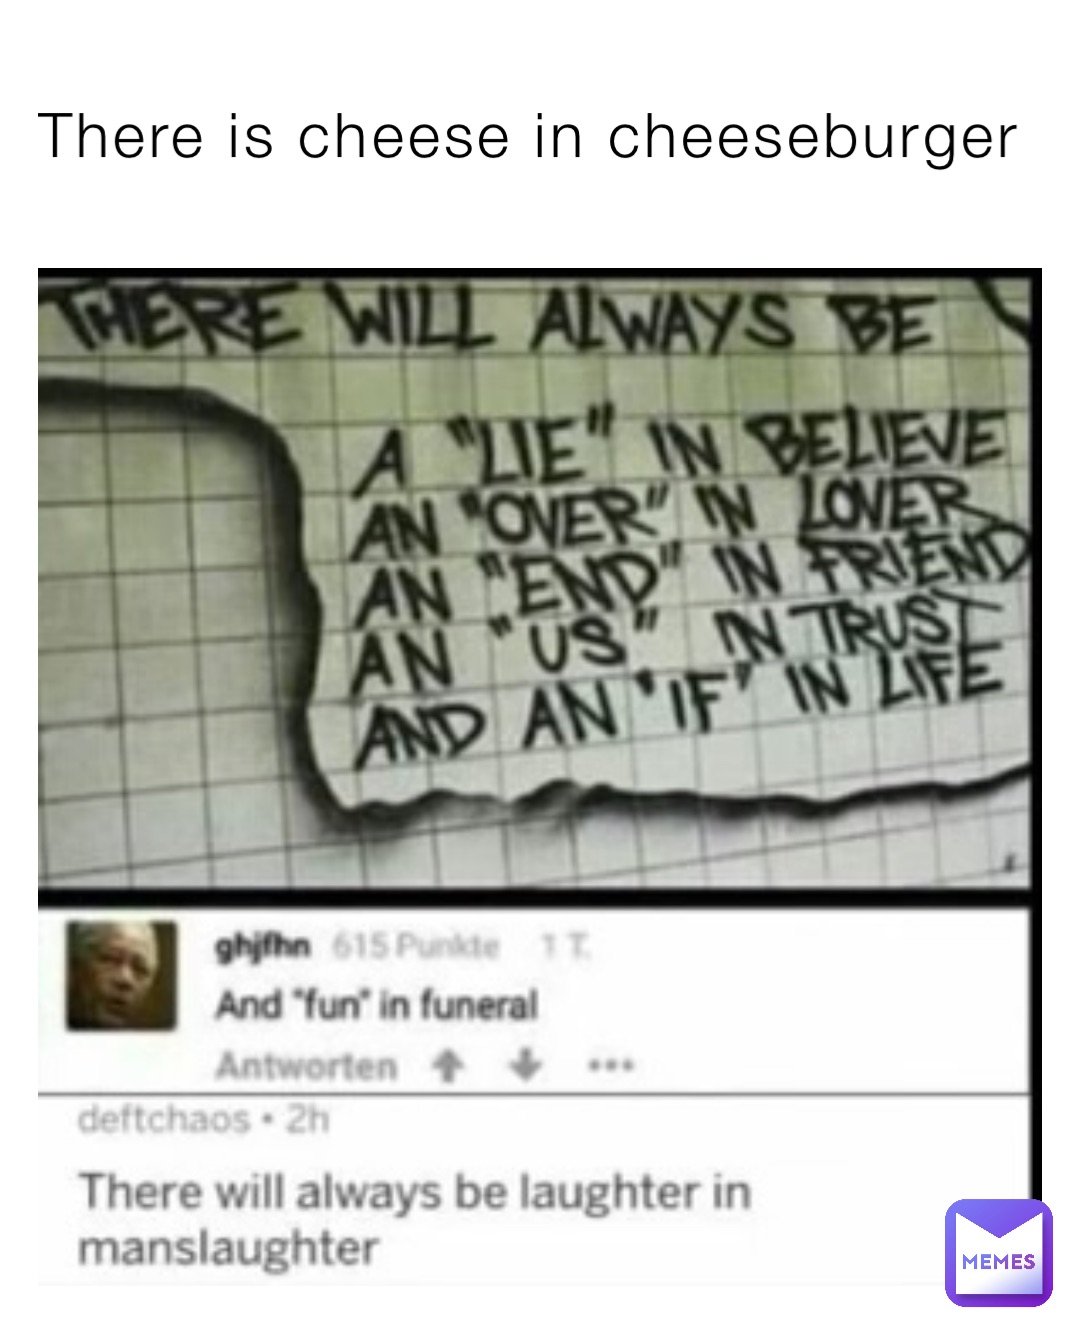 There is cheese in cheeseburger